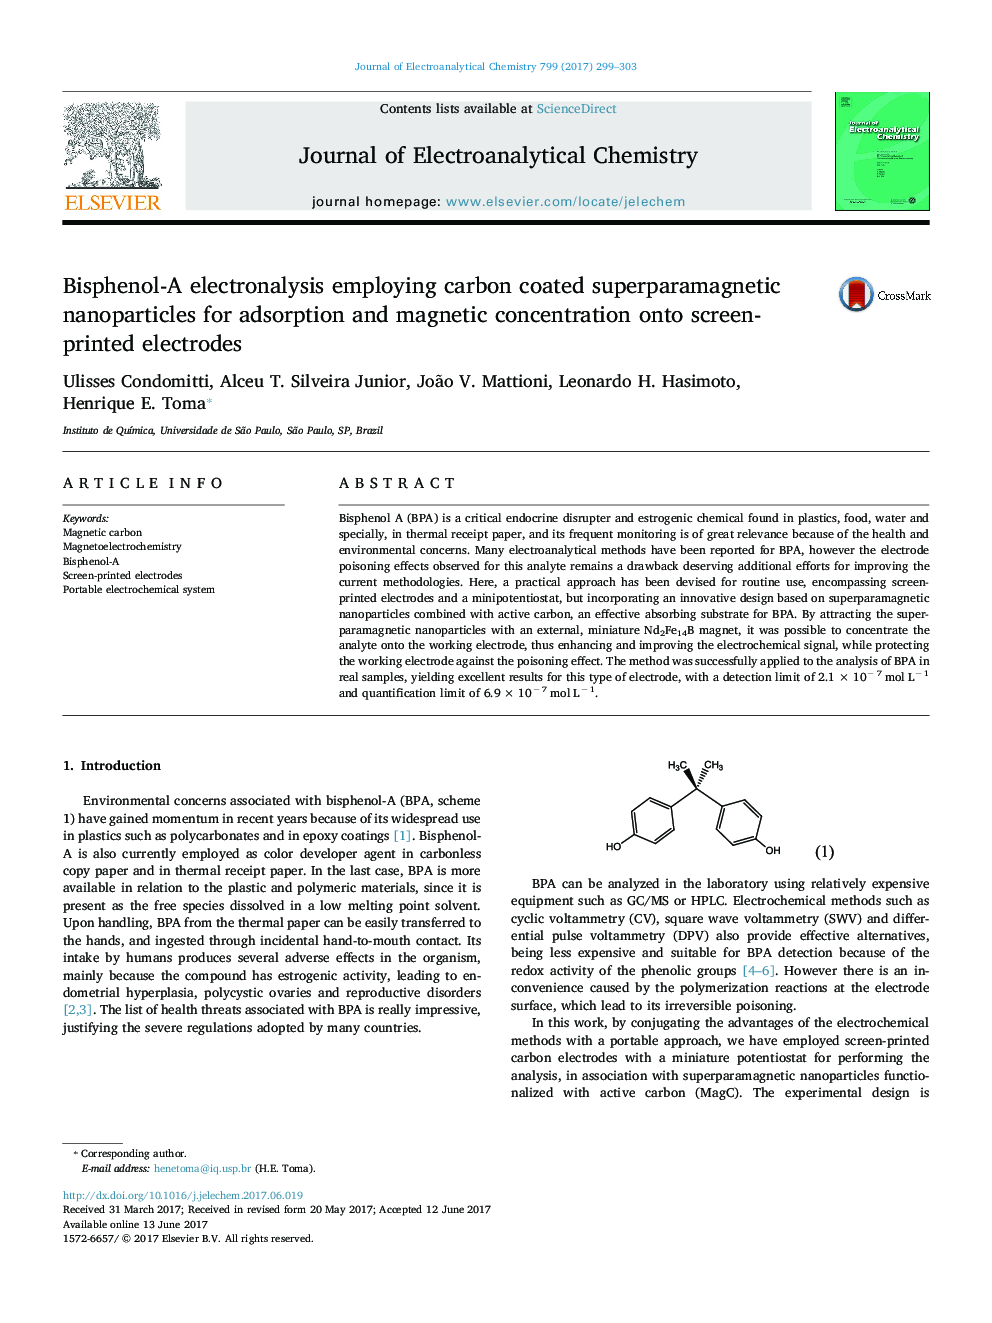 Bisphenol-A electronalysis employing carbon coated superparamagnetic nanoparticles for adsorption and magnetic concentration onto screen-printed electrodes